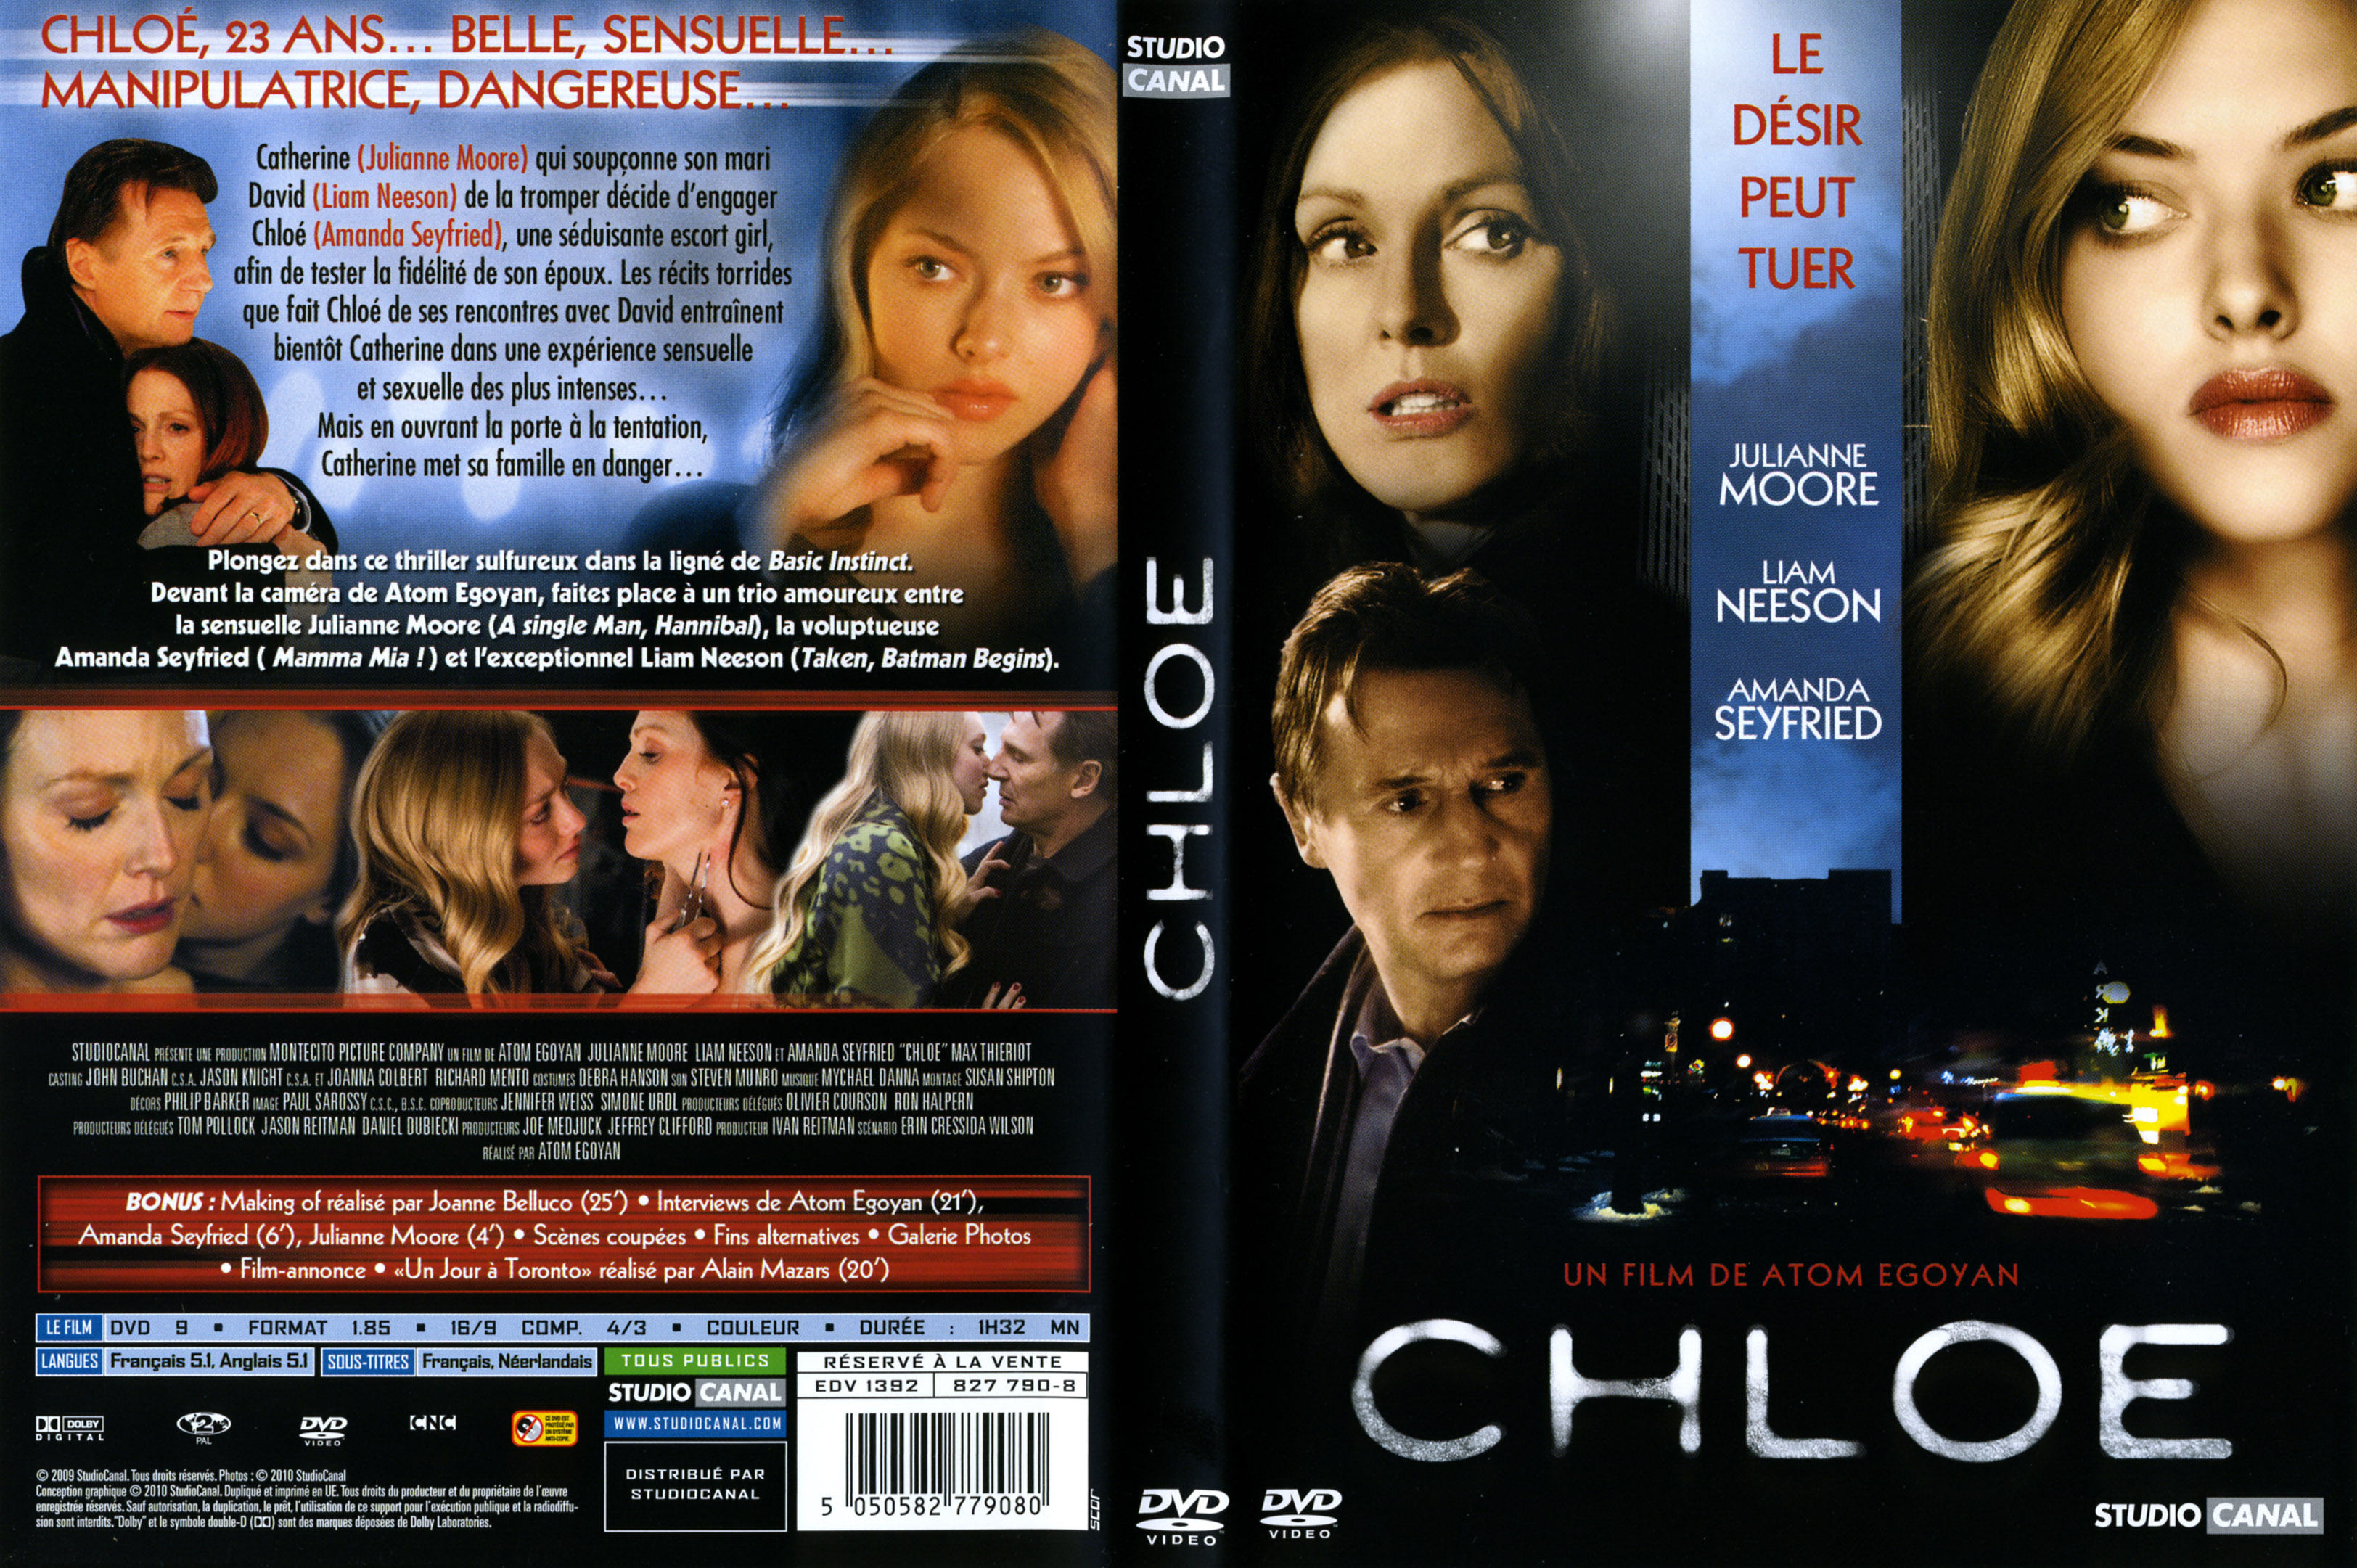 Jaquette DVD Chlo (2010)